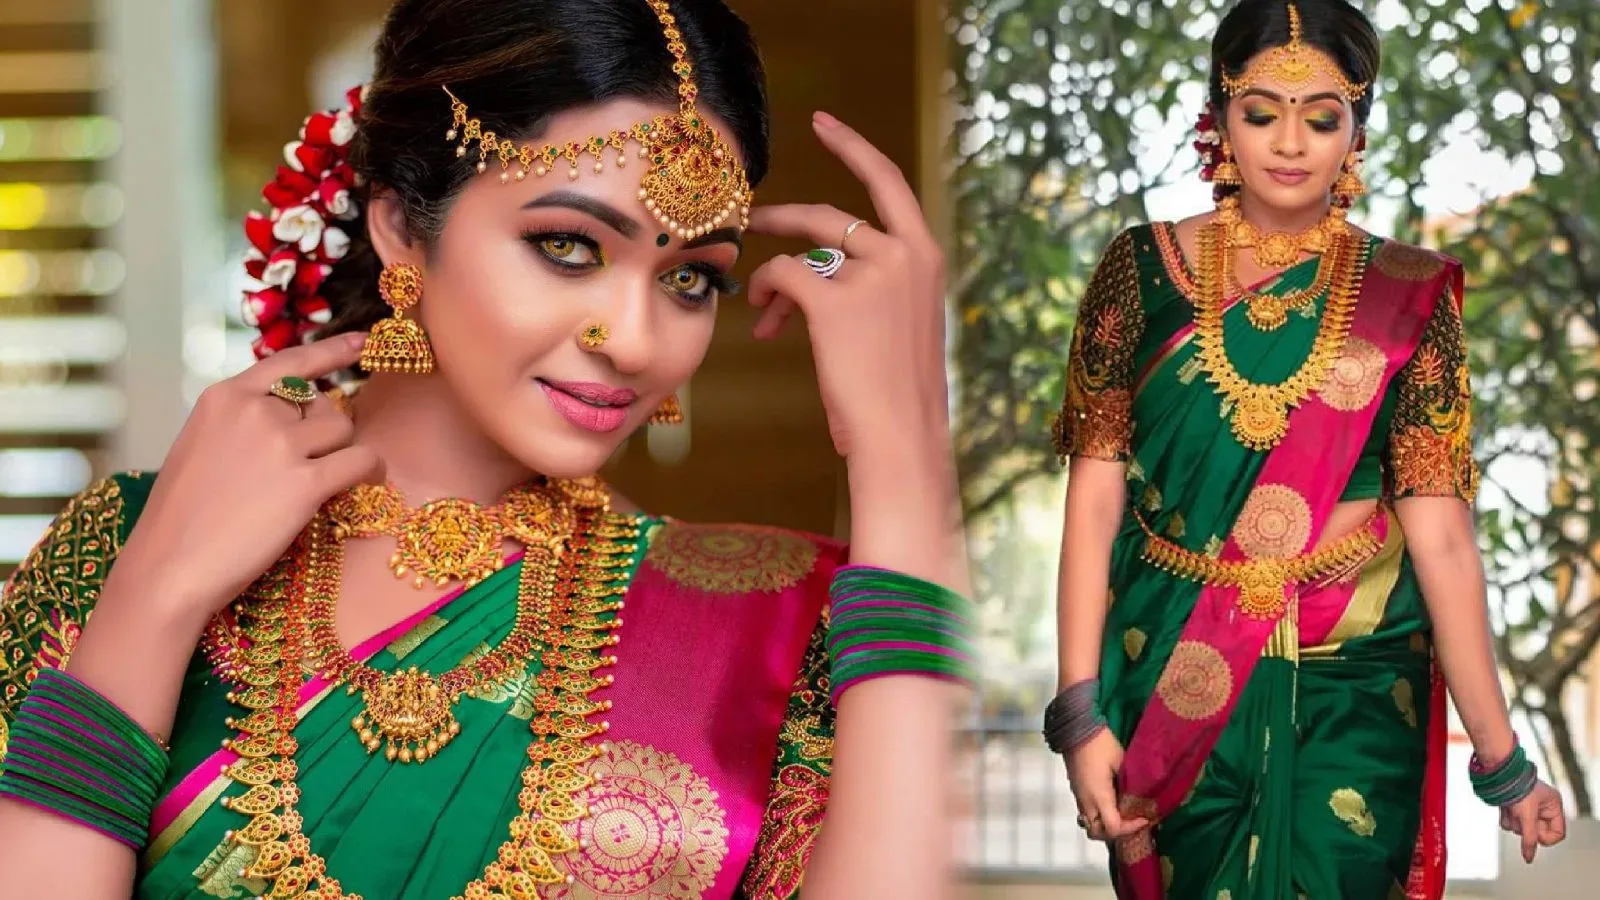 This Traditional Saree looks like it is made for Thara Kaluarachchi.